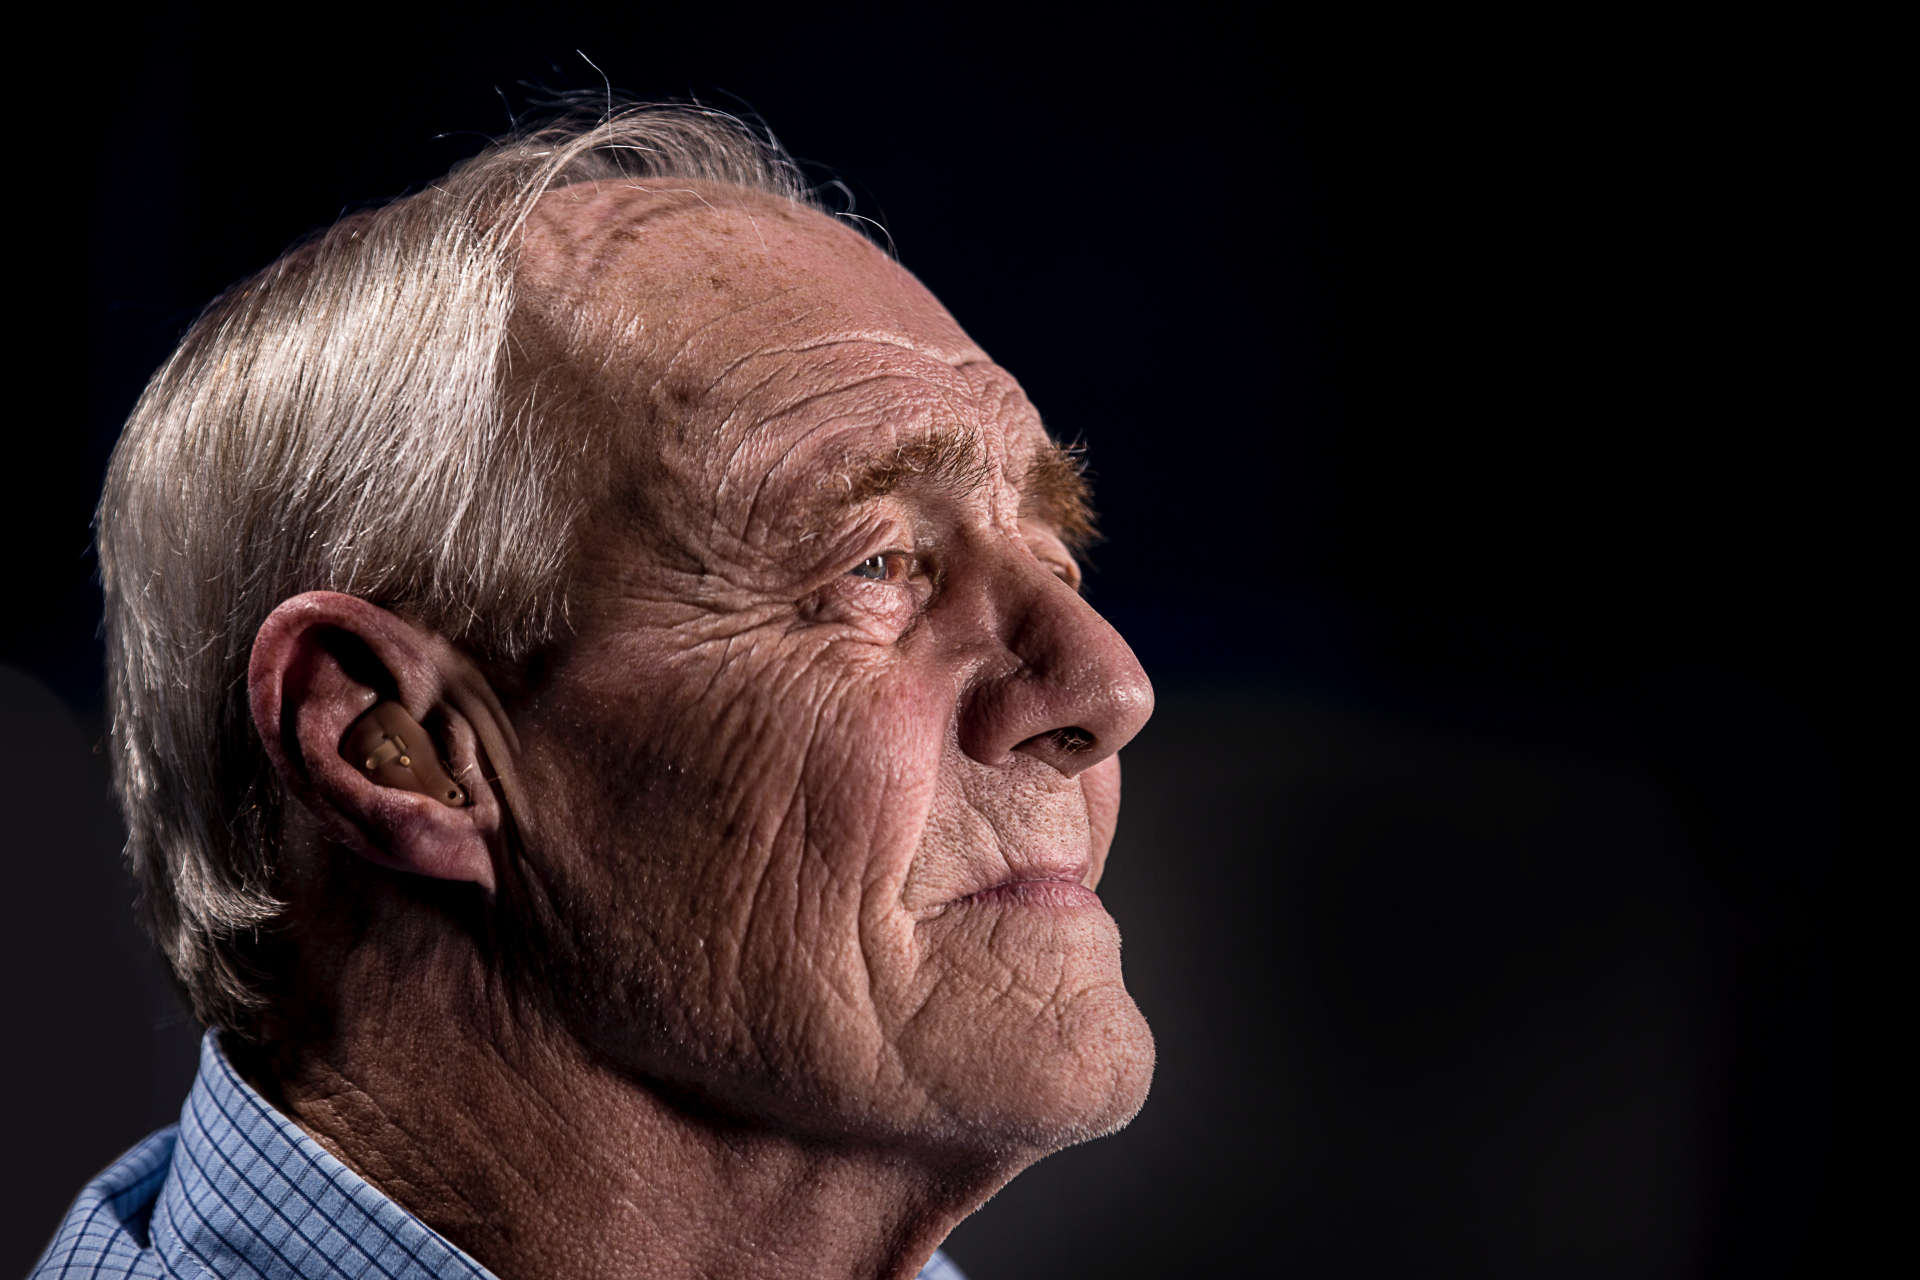 Elderly Man with Hearing Aid